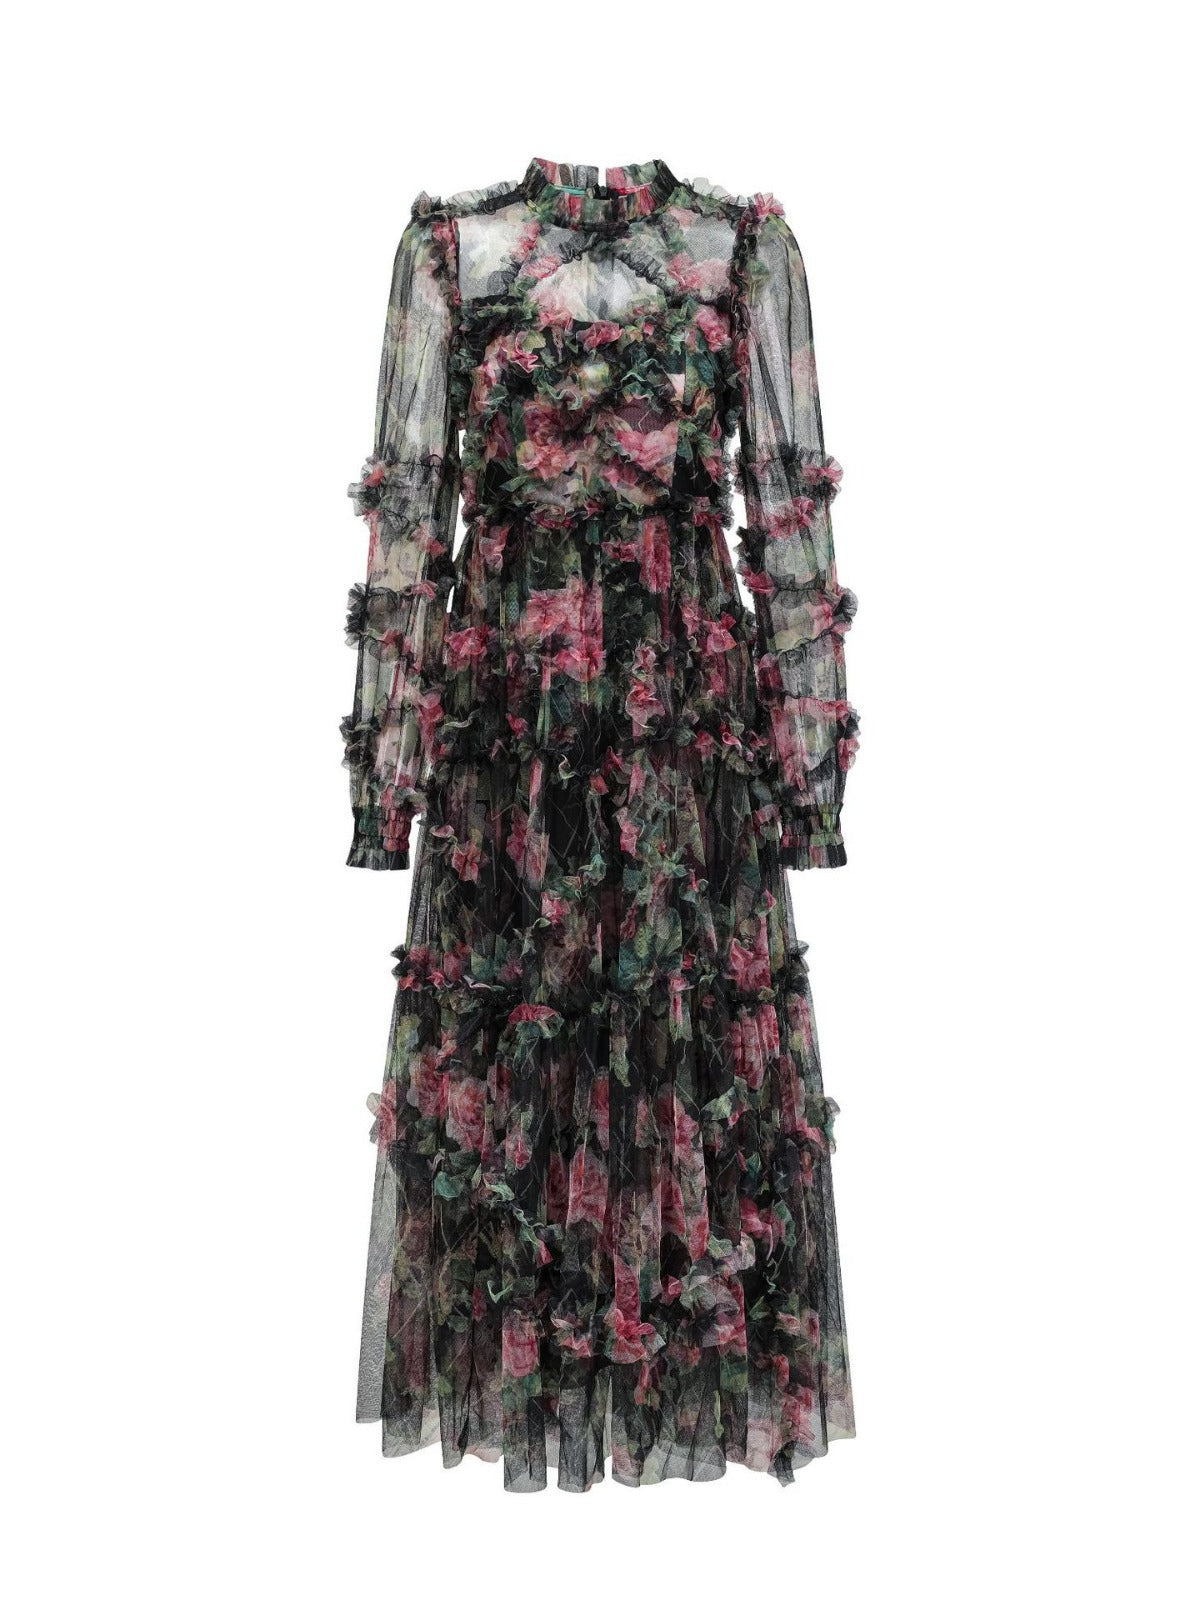 LOVECCR  Middle East Cross-Border Sweet Temperament Slimming Floral Dress Long Sleeve Autumn New Banquet Party Formal Dress